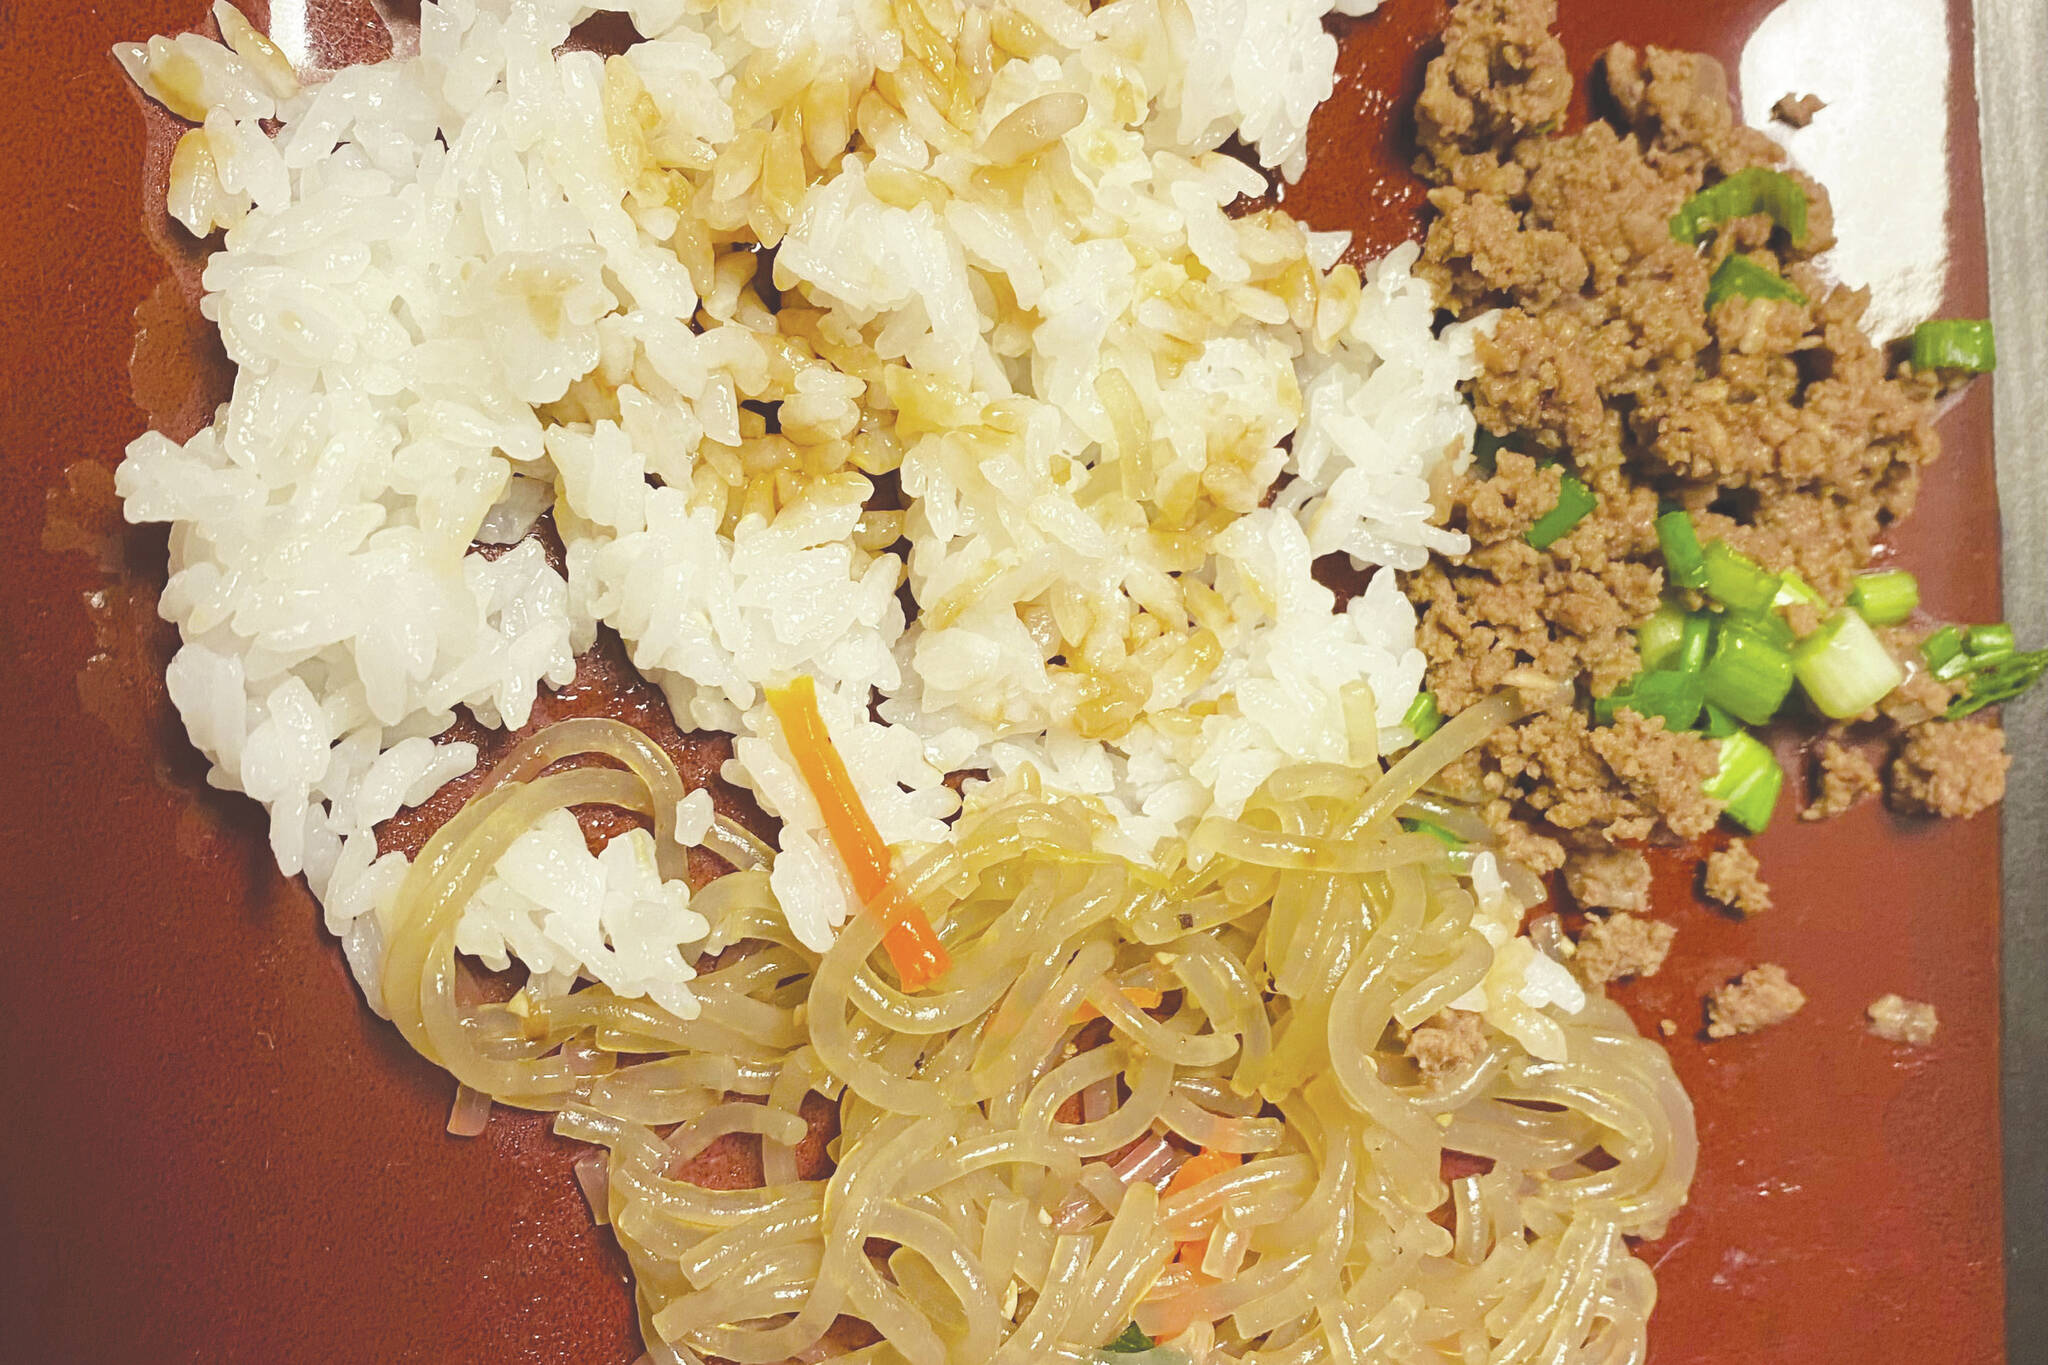 Ground Beef Bulkogi with sticky rice and noodles make a hearty Korean meal. (Photo by Tressa Dale/Peninsula Clarion)